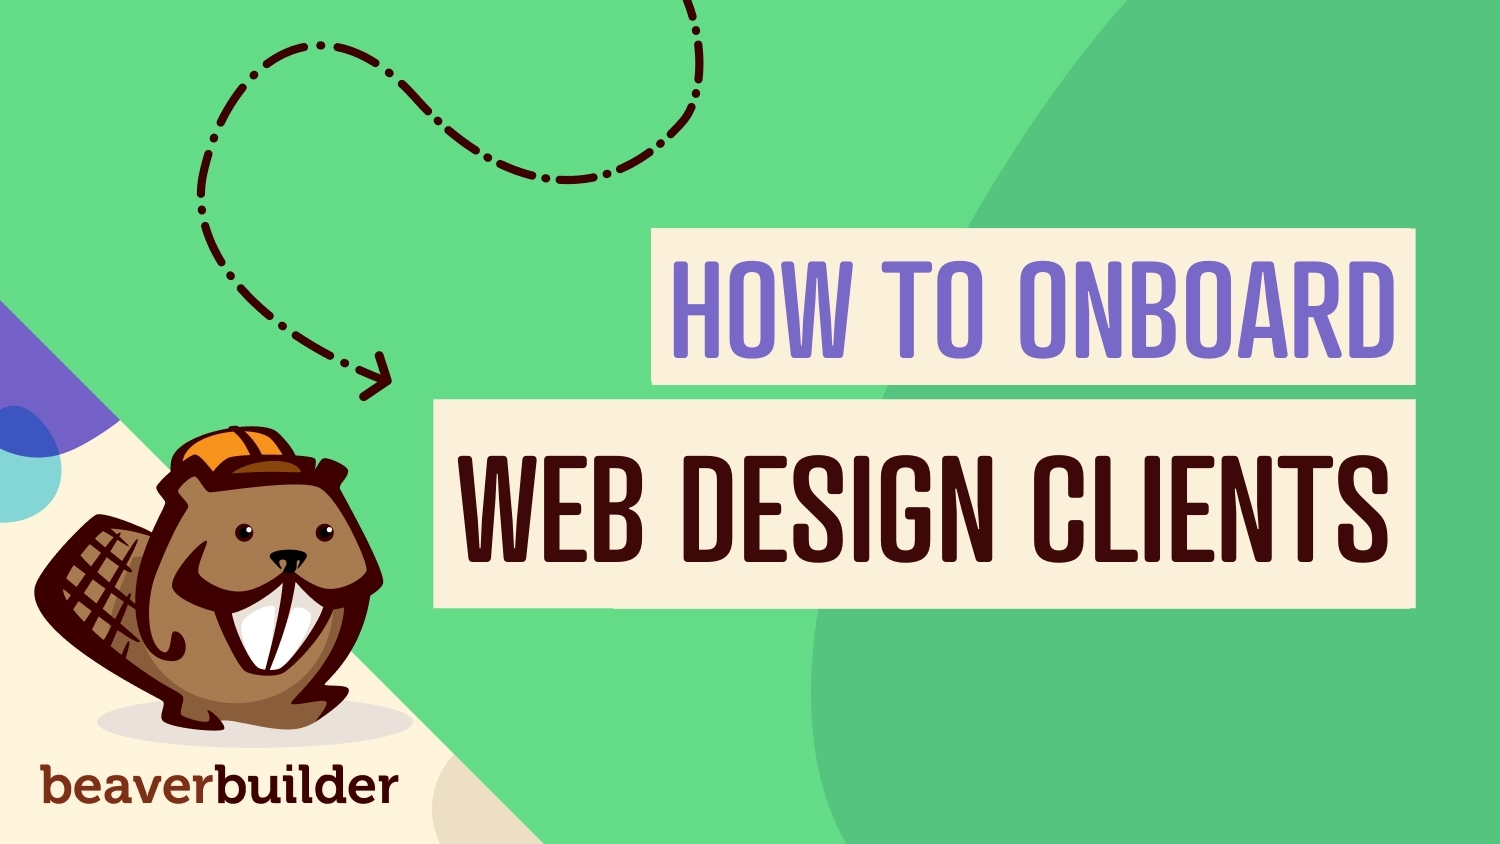 How to onboard web design clients